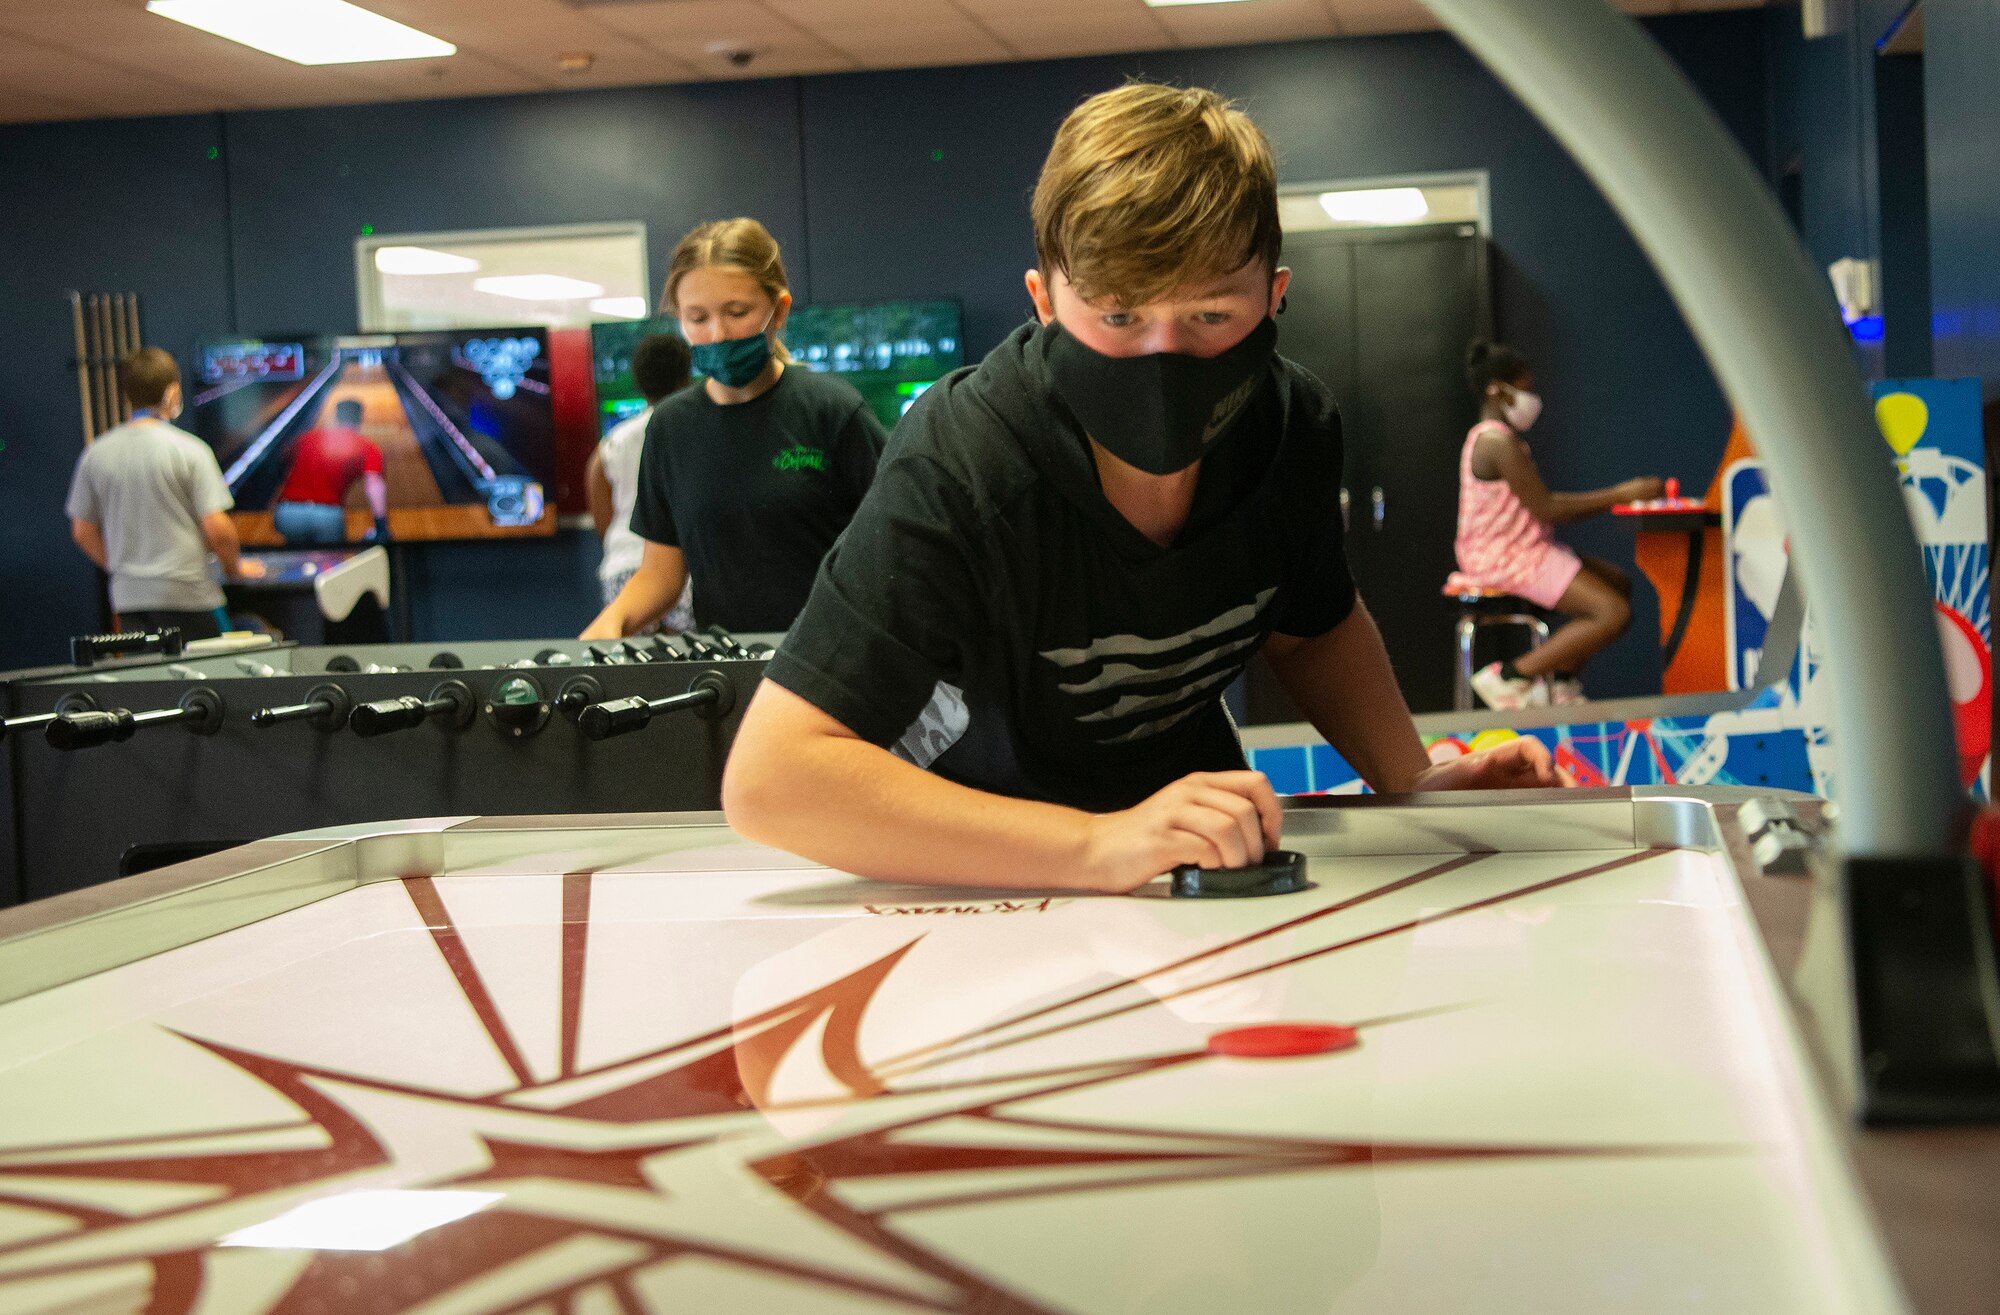 James Smith, 14, plays air hockey as Evelyn Wilbern, 12, checks out the foosball table behind him June 10, 2021, in the Prairies Youth Center’s new game room. The venue, which is having its grand opening June 18, features free arcade games. (U.S. Air Force photo by R.J. Oriez)